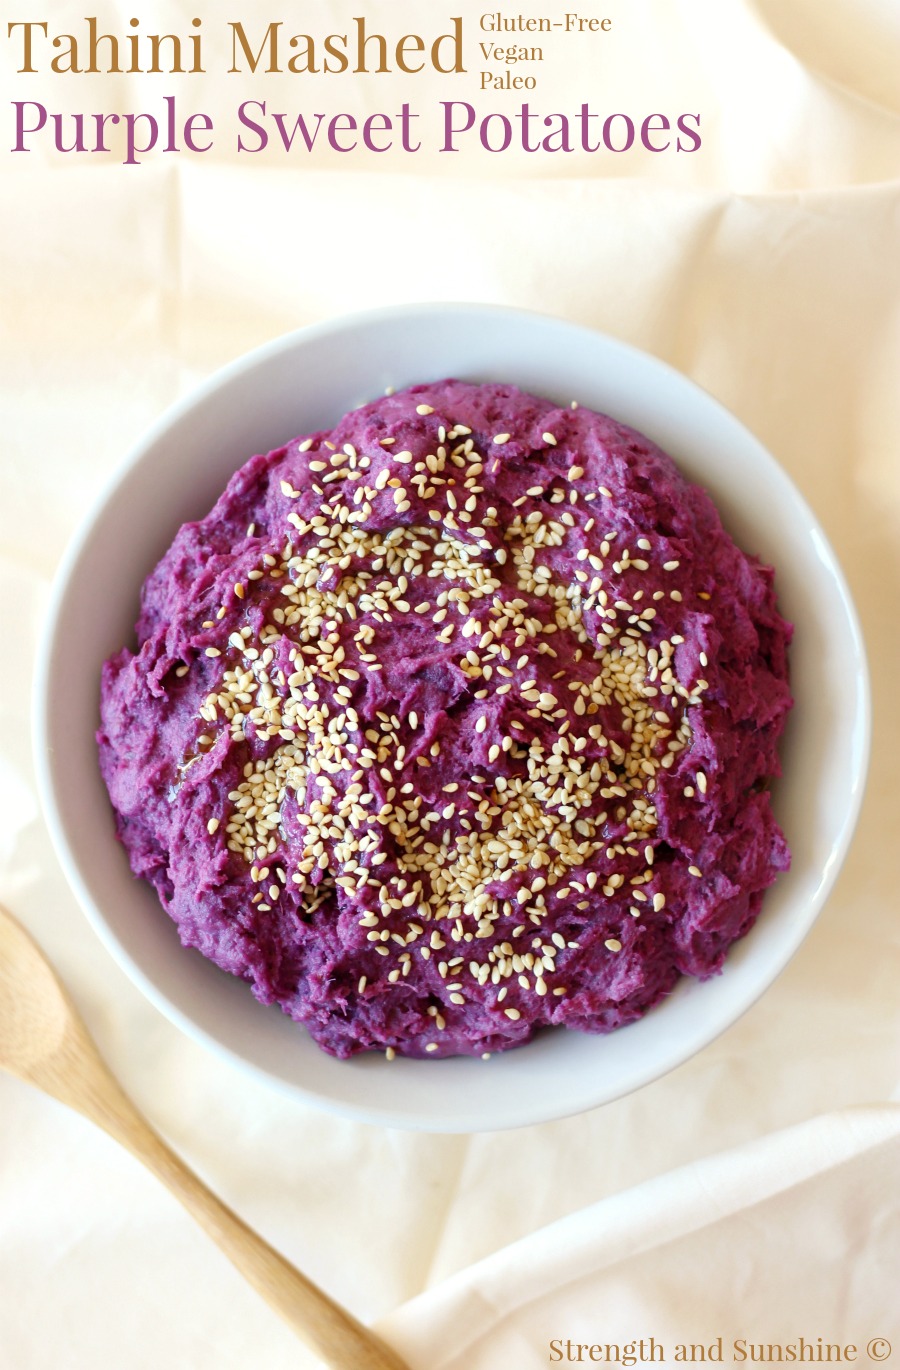 Tahini Mashed Purple Sweet Potatoes | Strength and Sunshine @RebeccaGF666 There's nothing quite as comforting as a plate of mashed potatoes, but it's time to take it up a notch! Tahini Mashed Purple Sweet Potatoes will blow the traditional side dish out of the park! This recipe is gluten-free, vegan, paleo, and top 8 allergy-free! This purple mash will be the star of any family dinner!